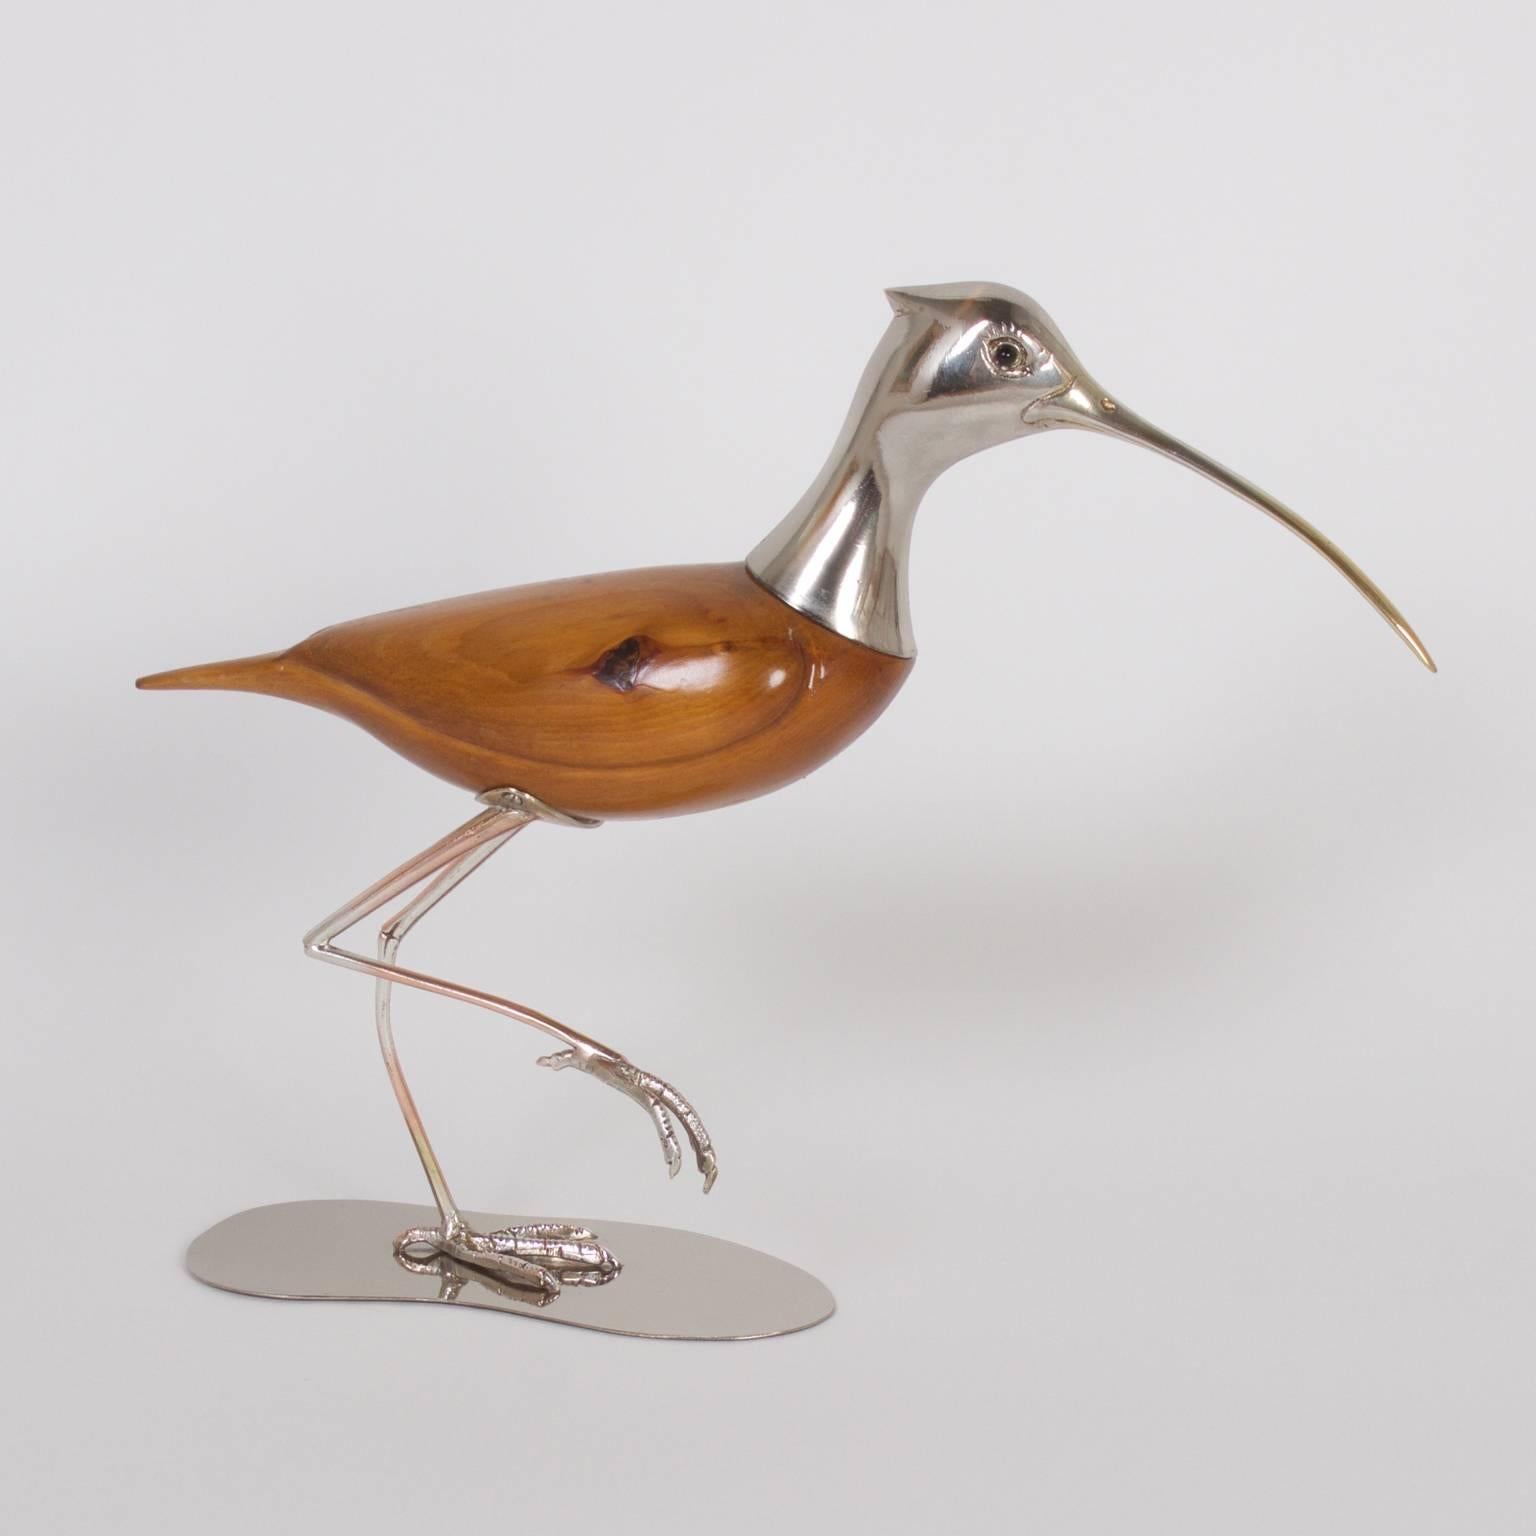 Here are two modern bird sculptures expertly crafted with silvered metal and knotty pine. Both figures display the artist's acute knack for capturing the spirit of the birds in a stylized Mid-Century technique. Both signed DS on the